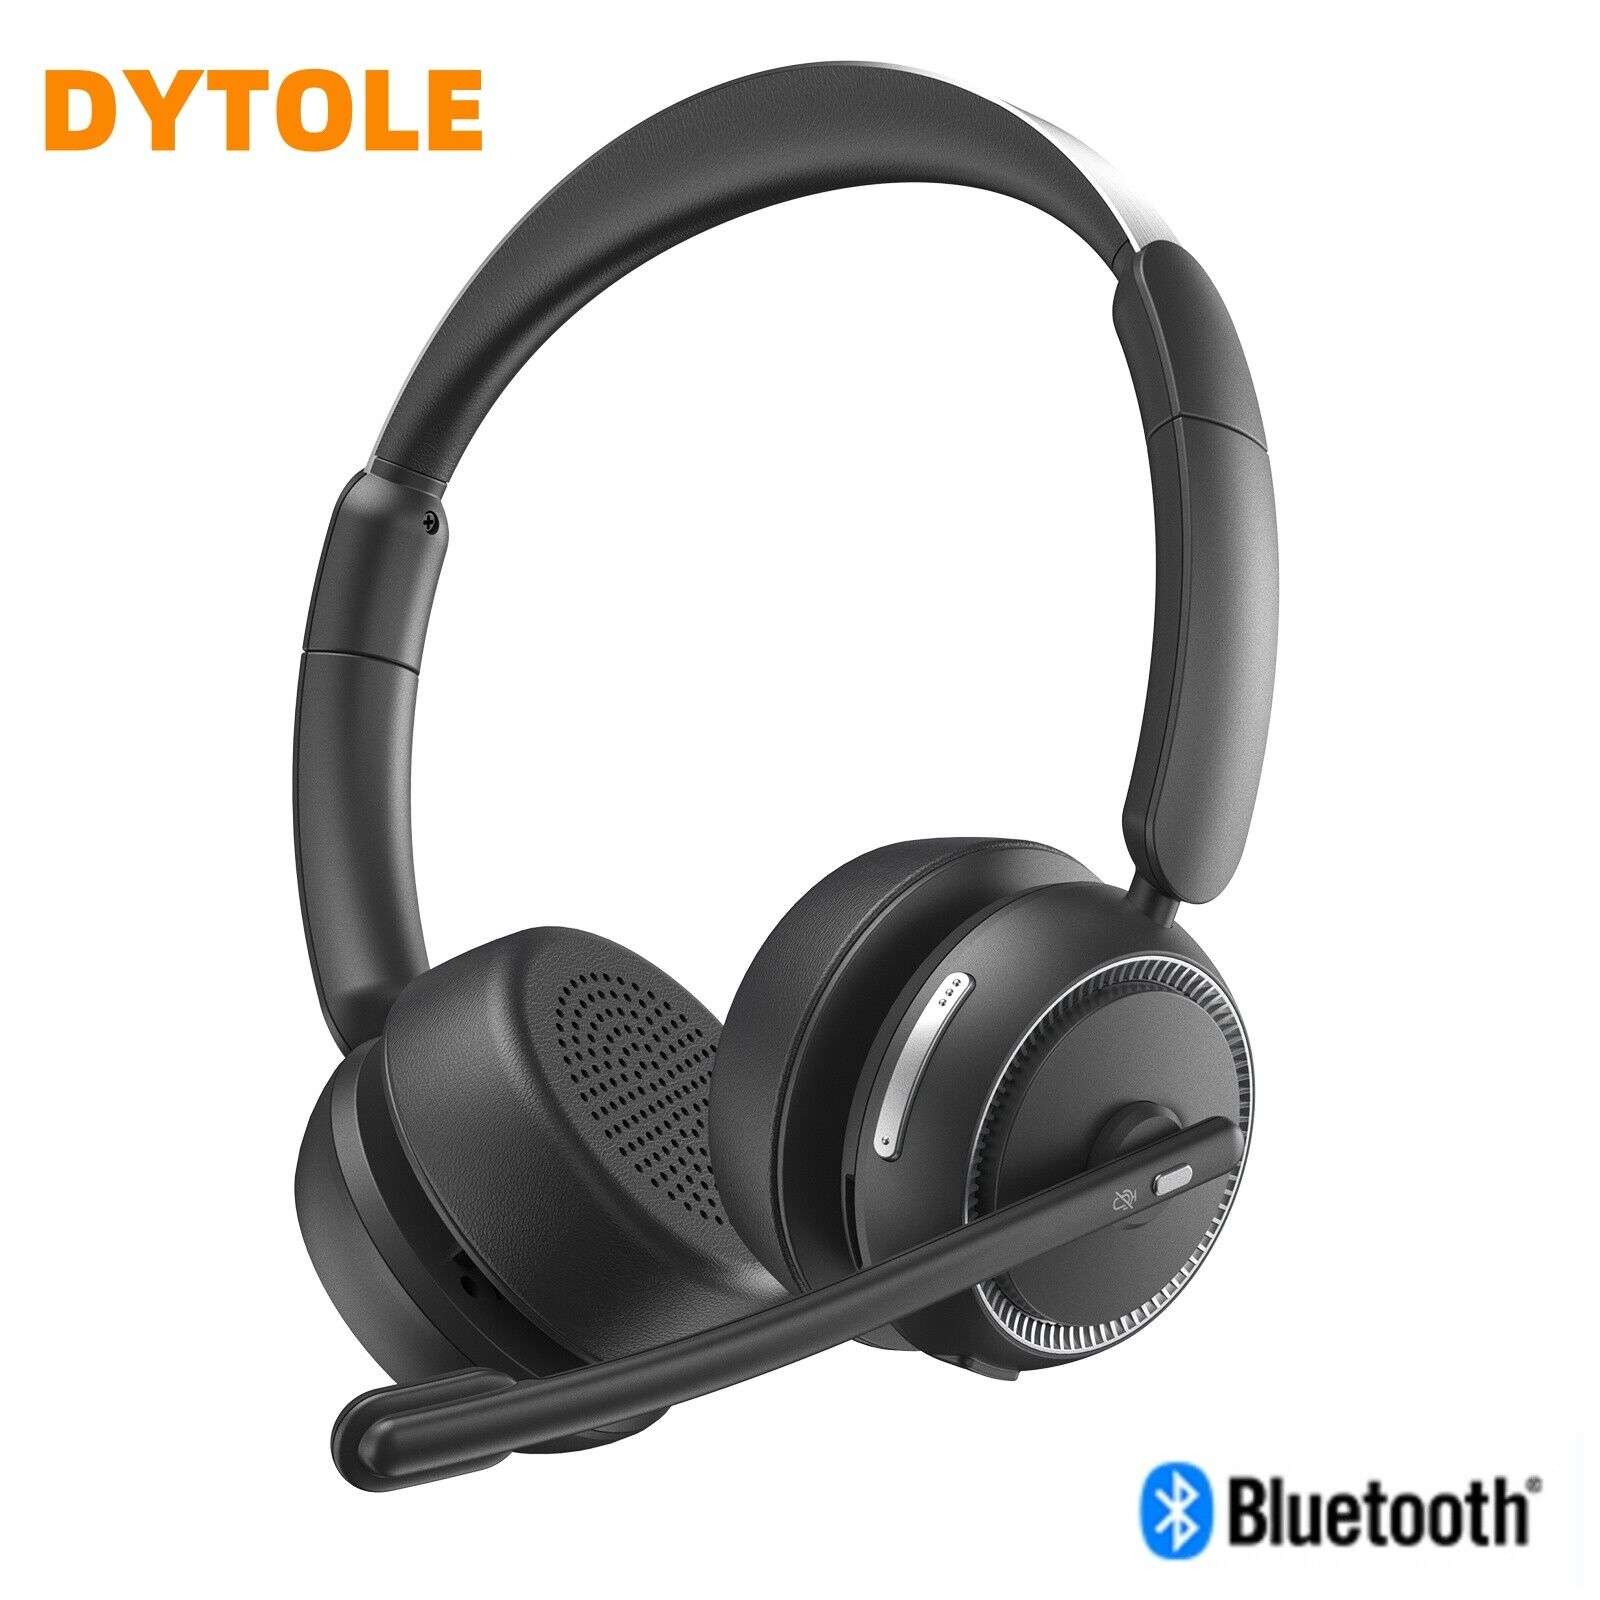 Dytole Bluetooth 5.2 Wireless Headset With Mic Noise Canceling & HI-FI Sound